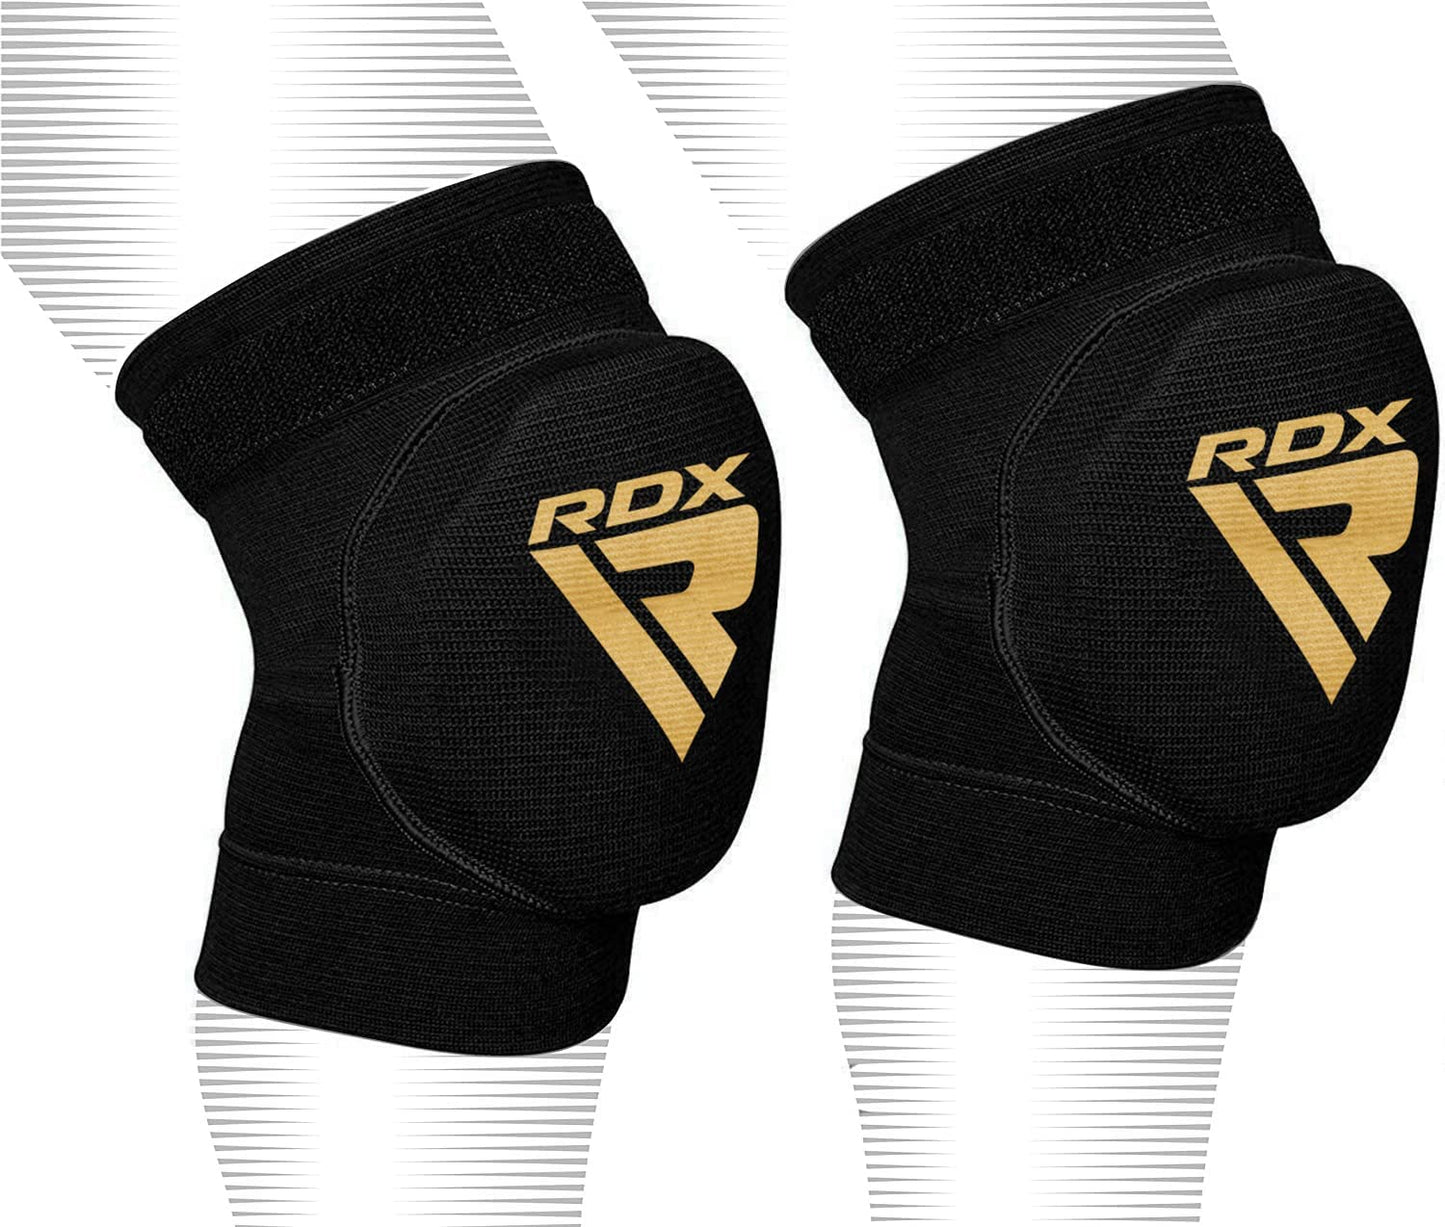 RDX Knee Support Brace Protector